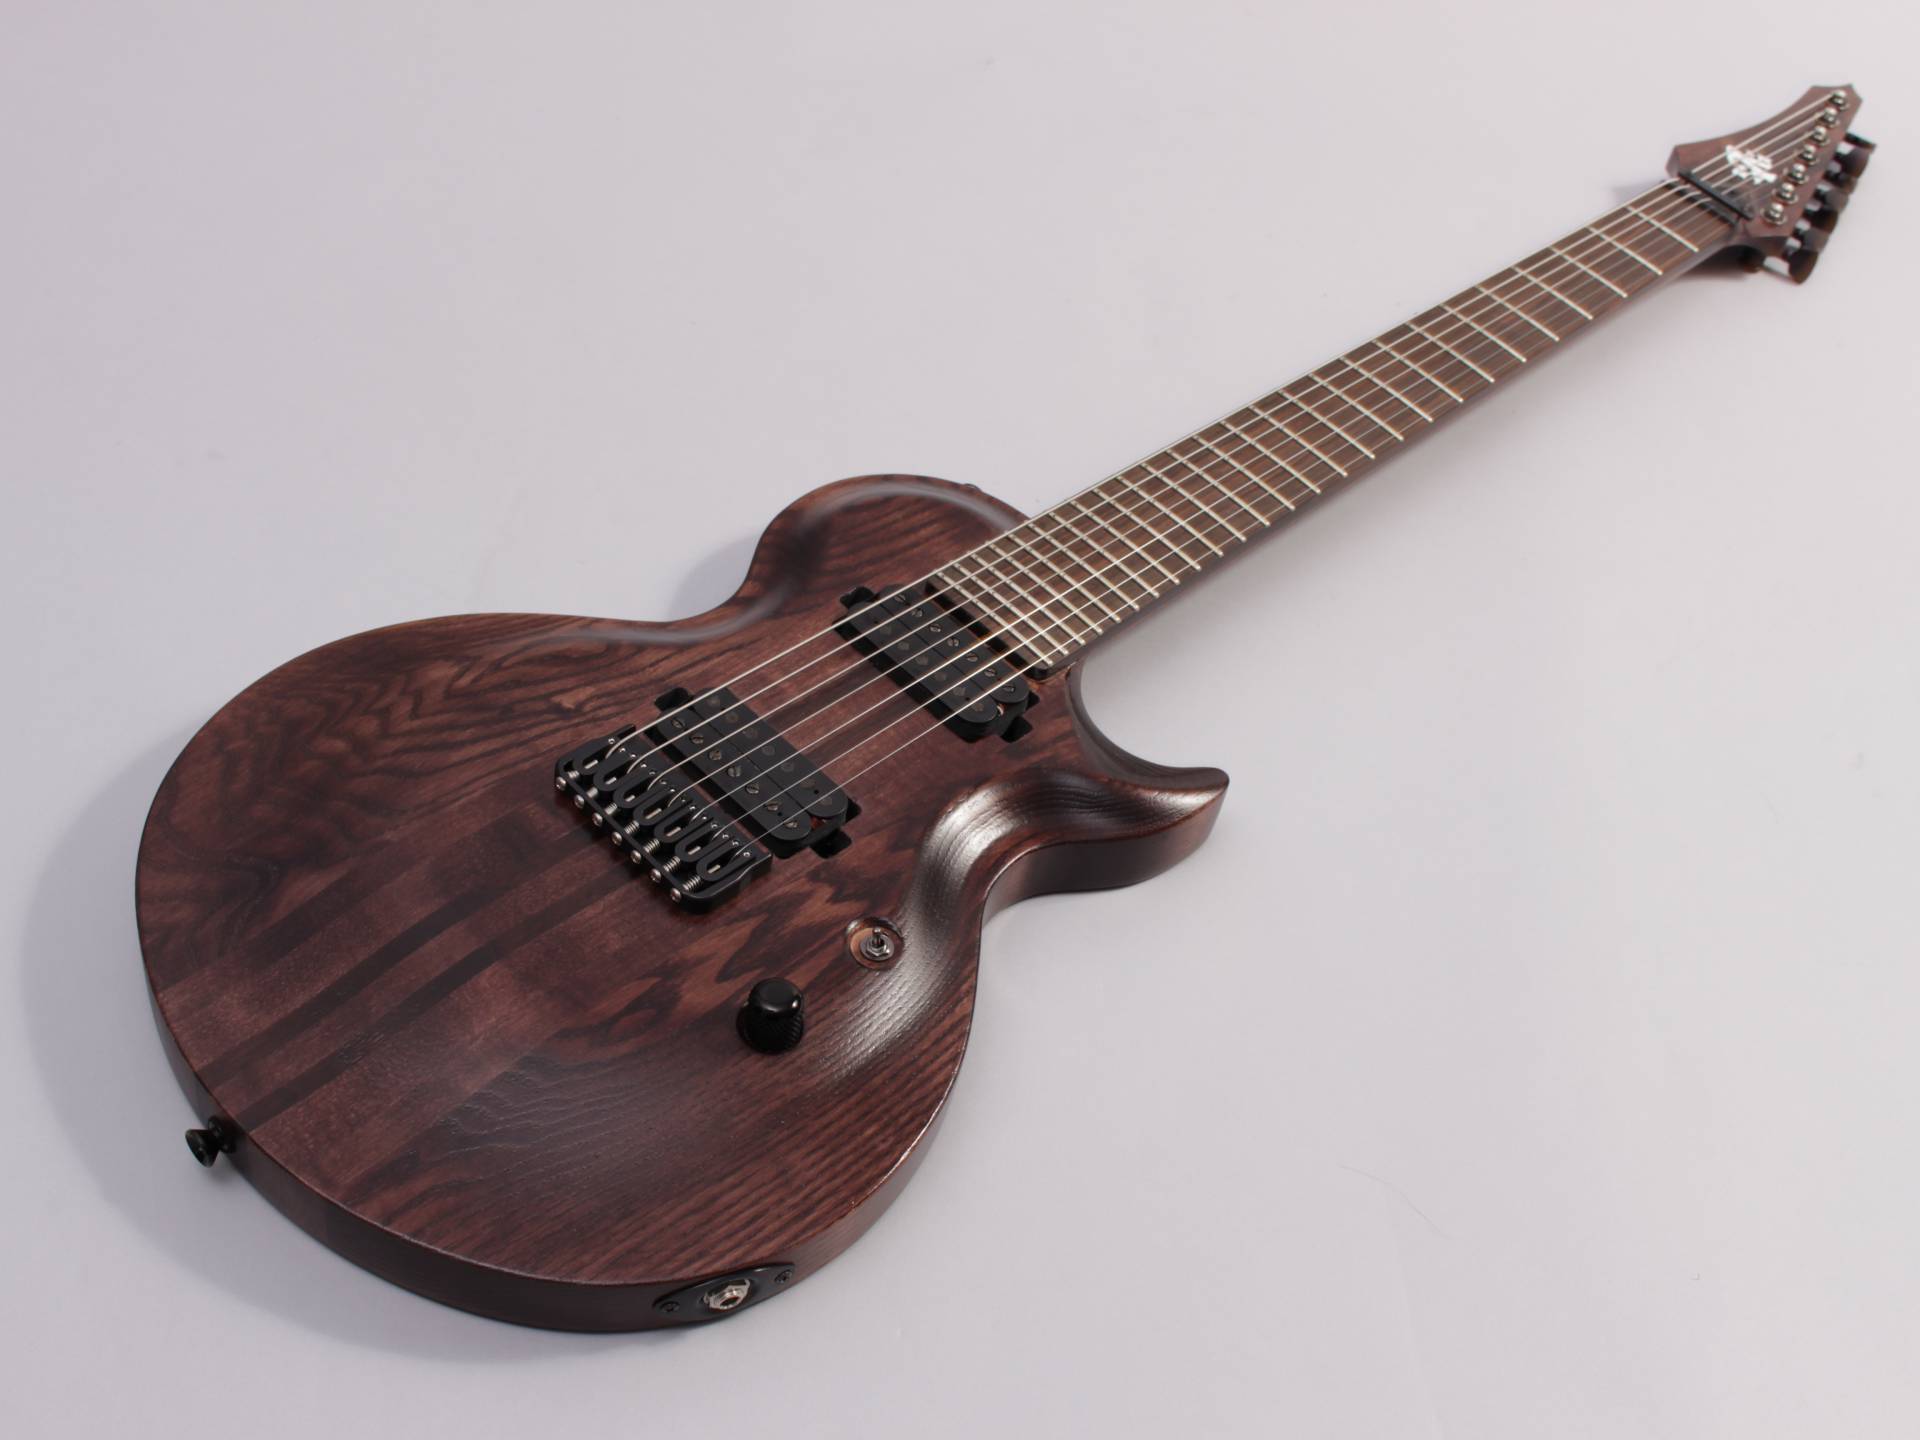 SSS】STRICTLY SPECIAL SALE | Strictly 7 Guitars NEWS